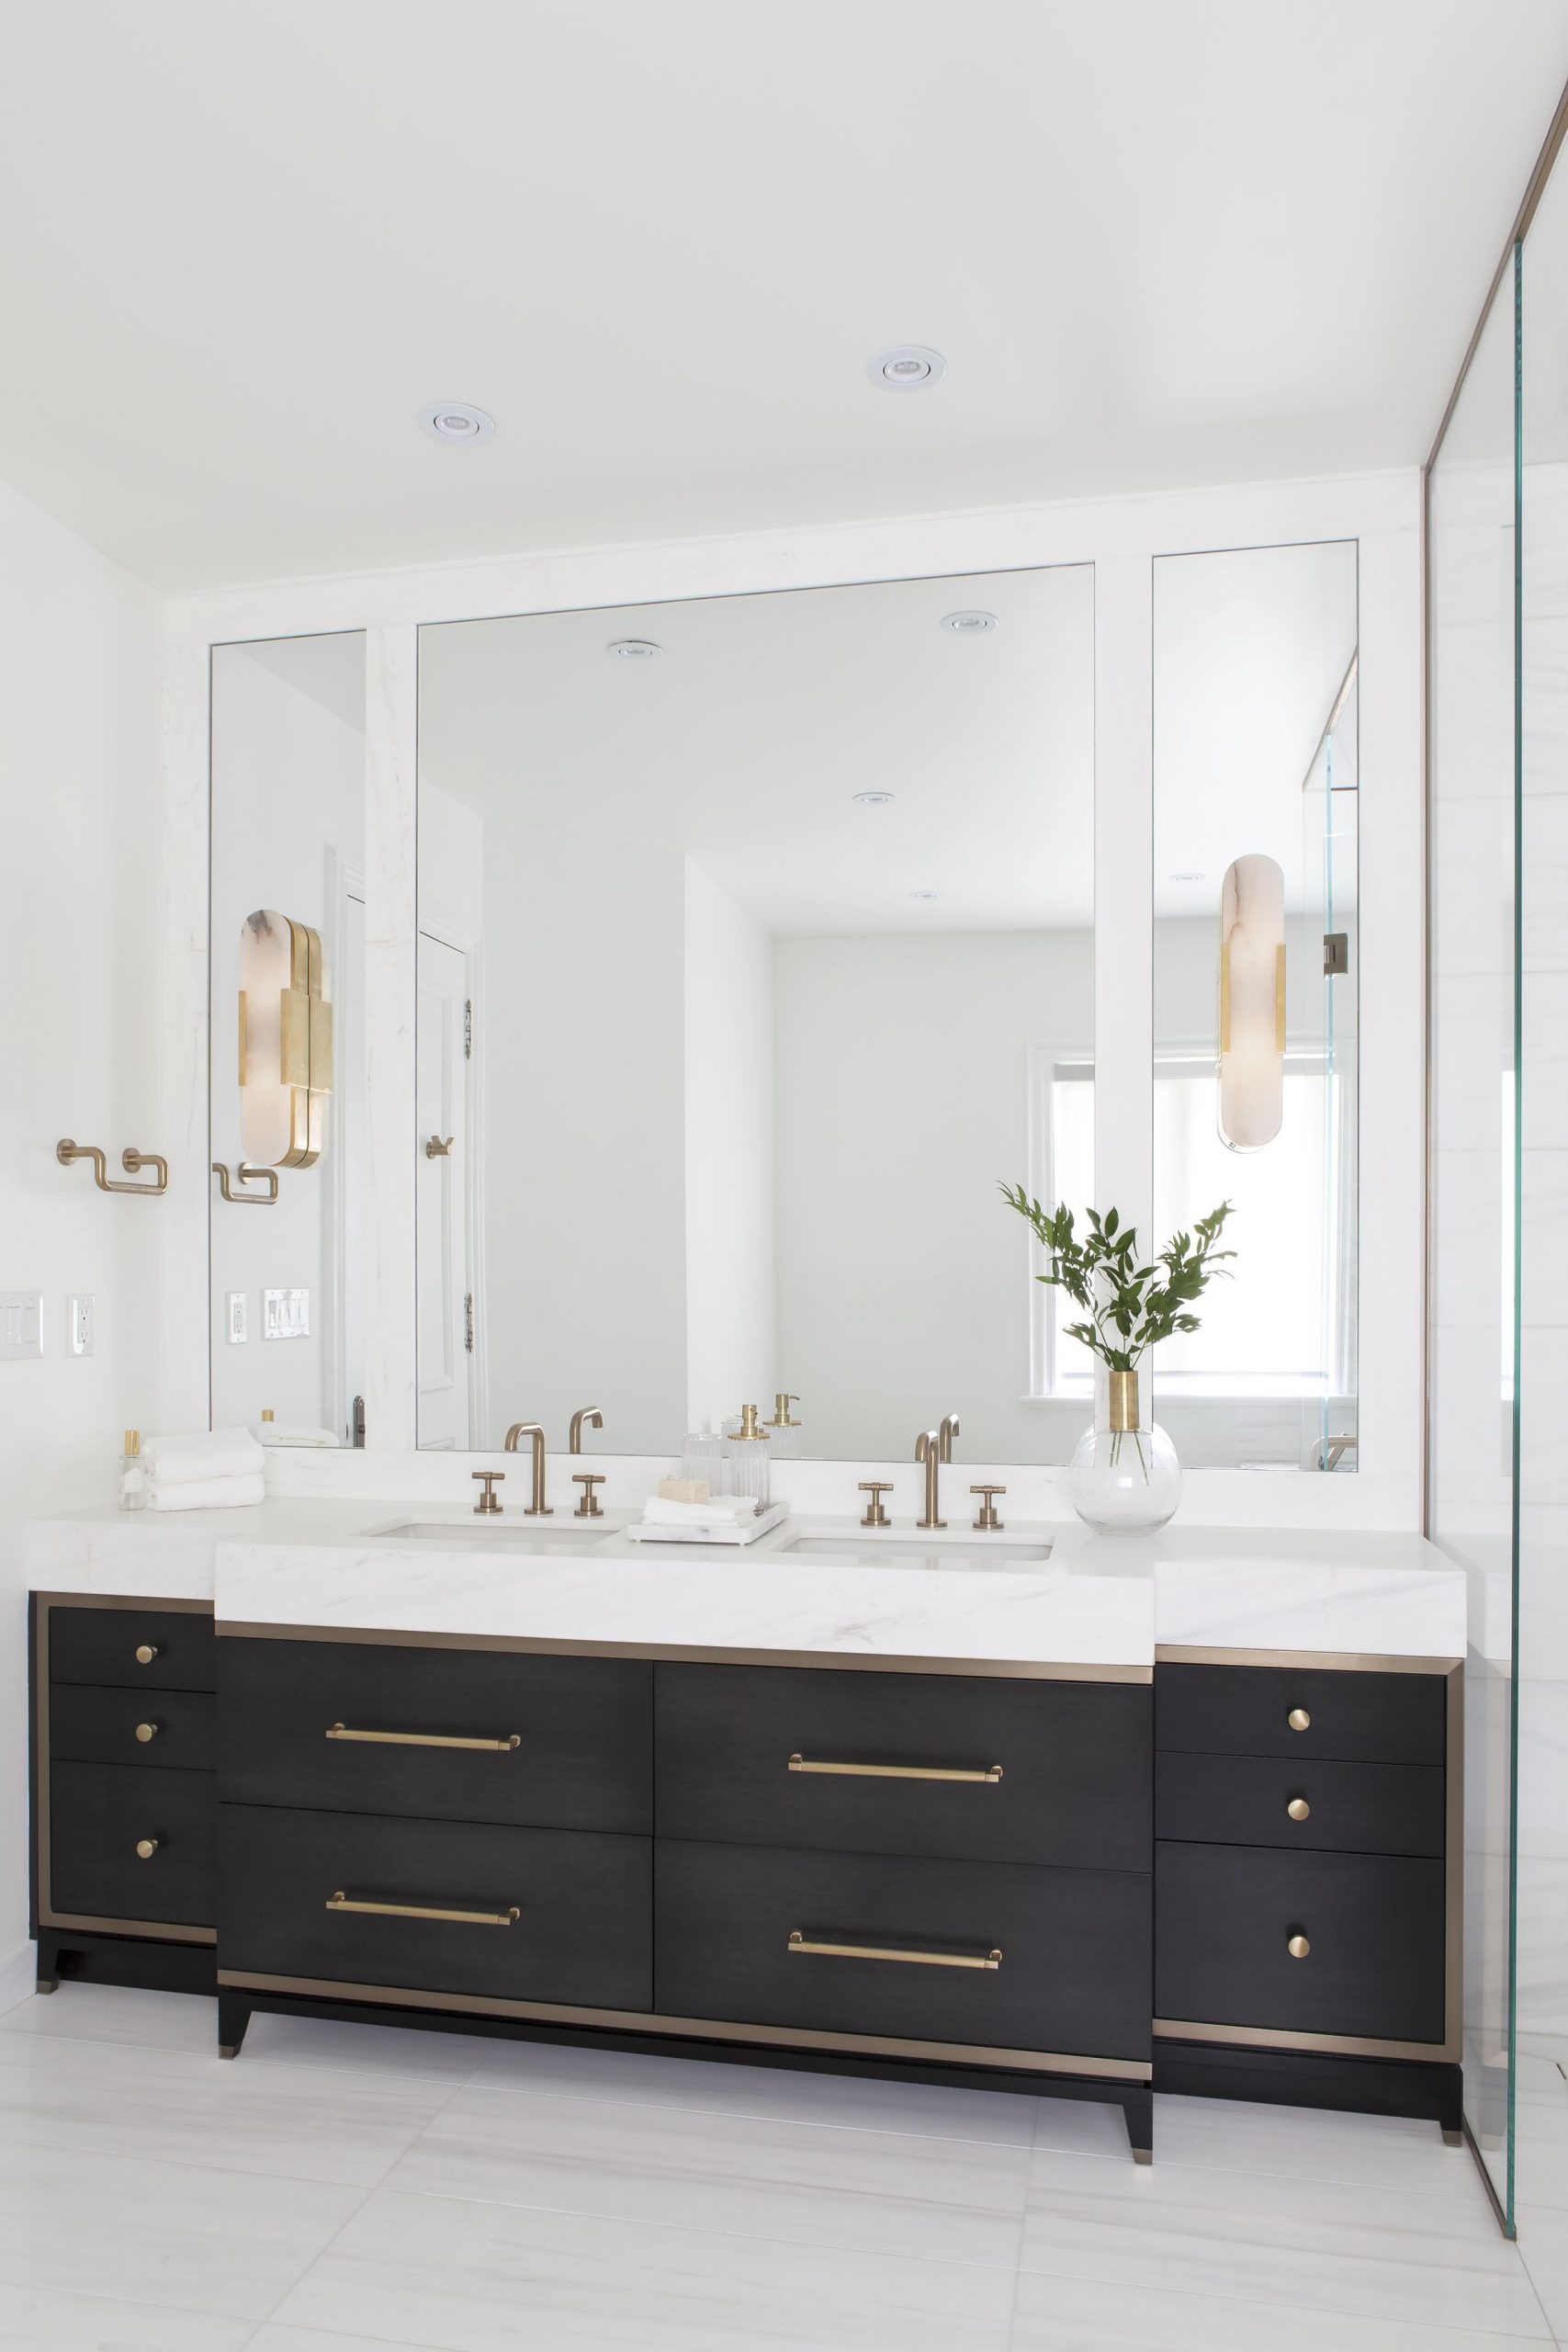 Bathroom Mirror Ideas to Reflect Your Style